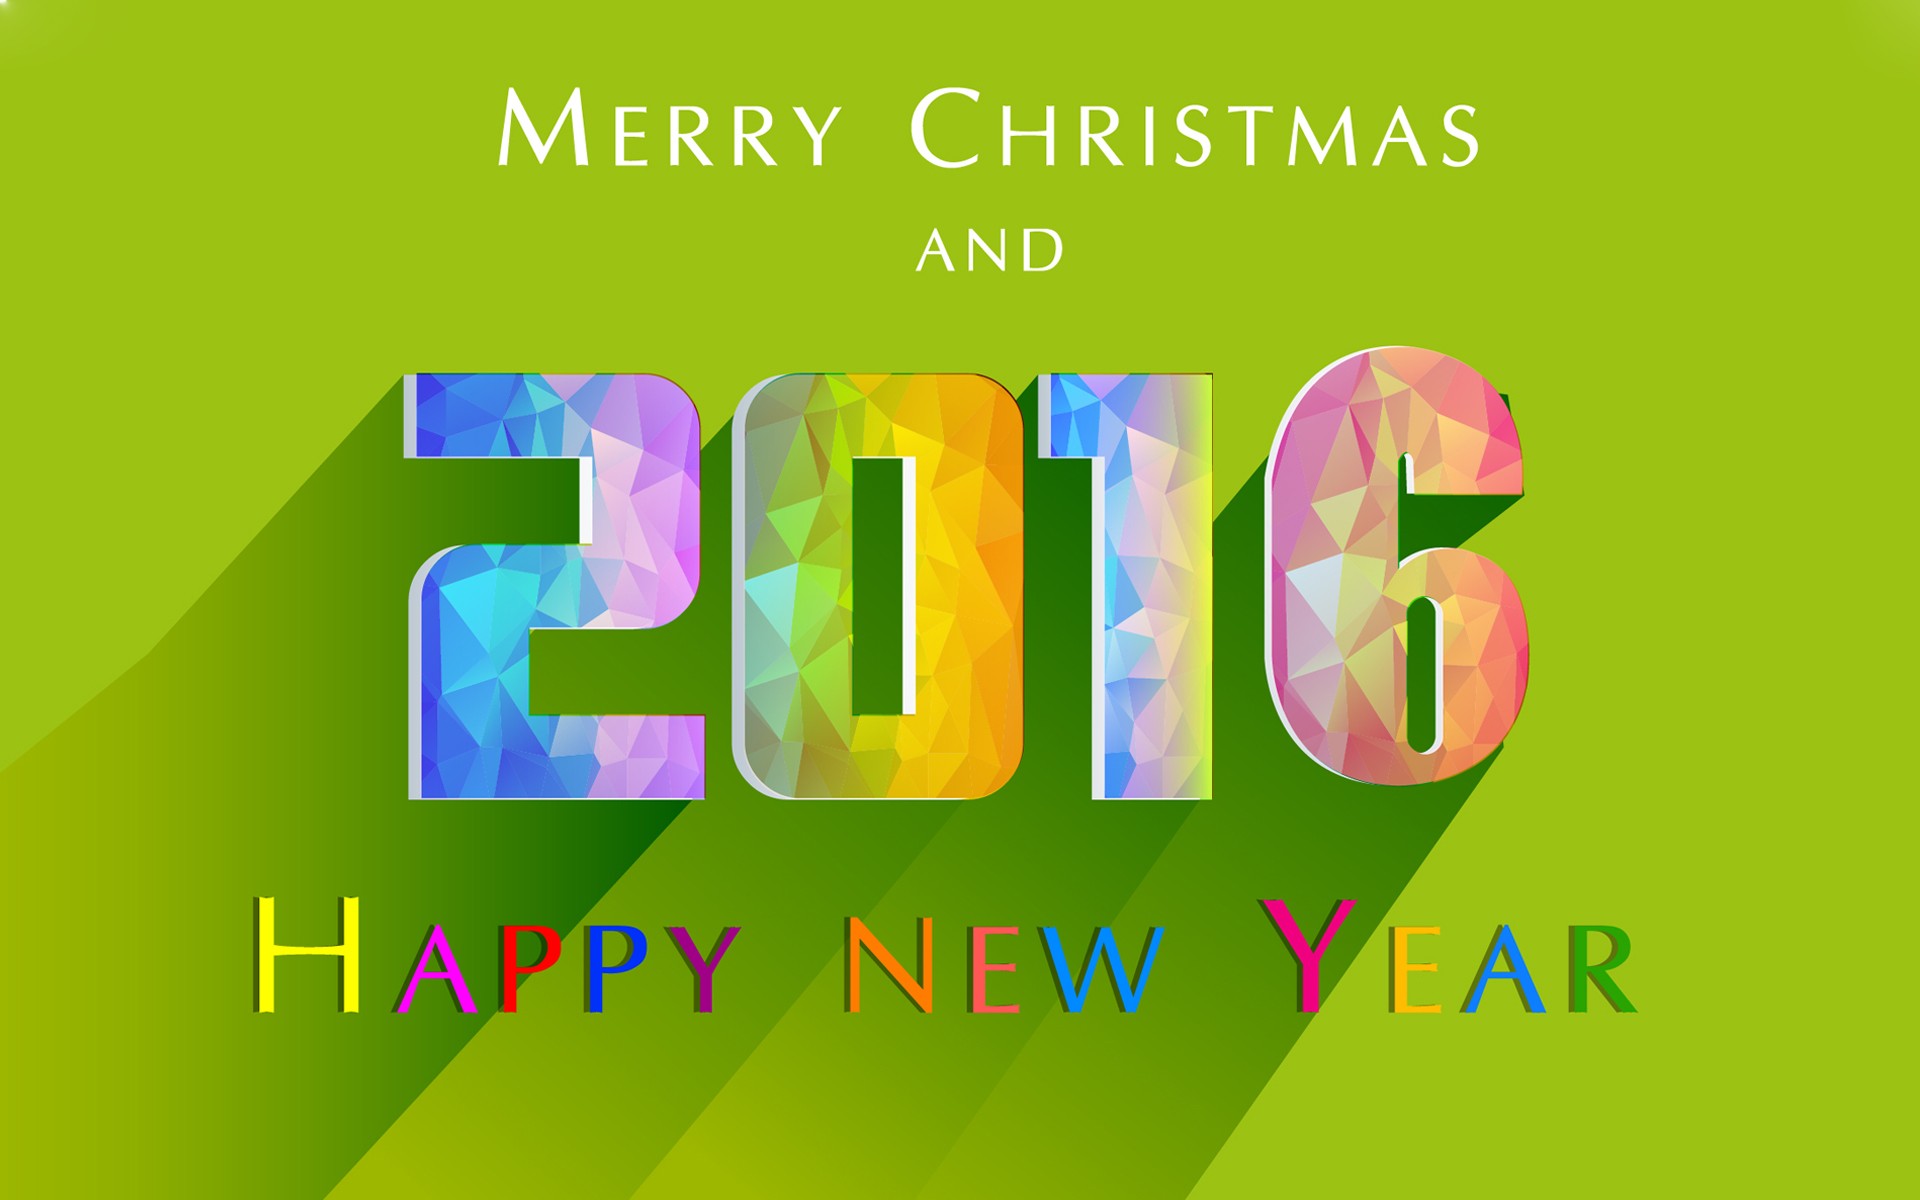 Happy New Year 2016 HD Wallpaper   New HD Wallpapers